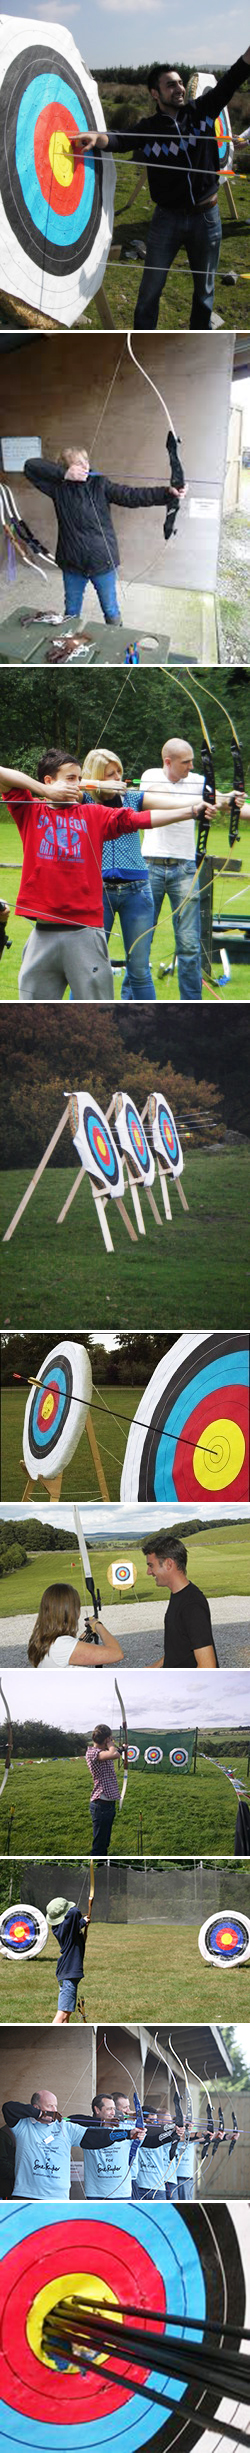 The Coniston Hotel and Country Estate, Archery